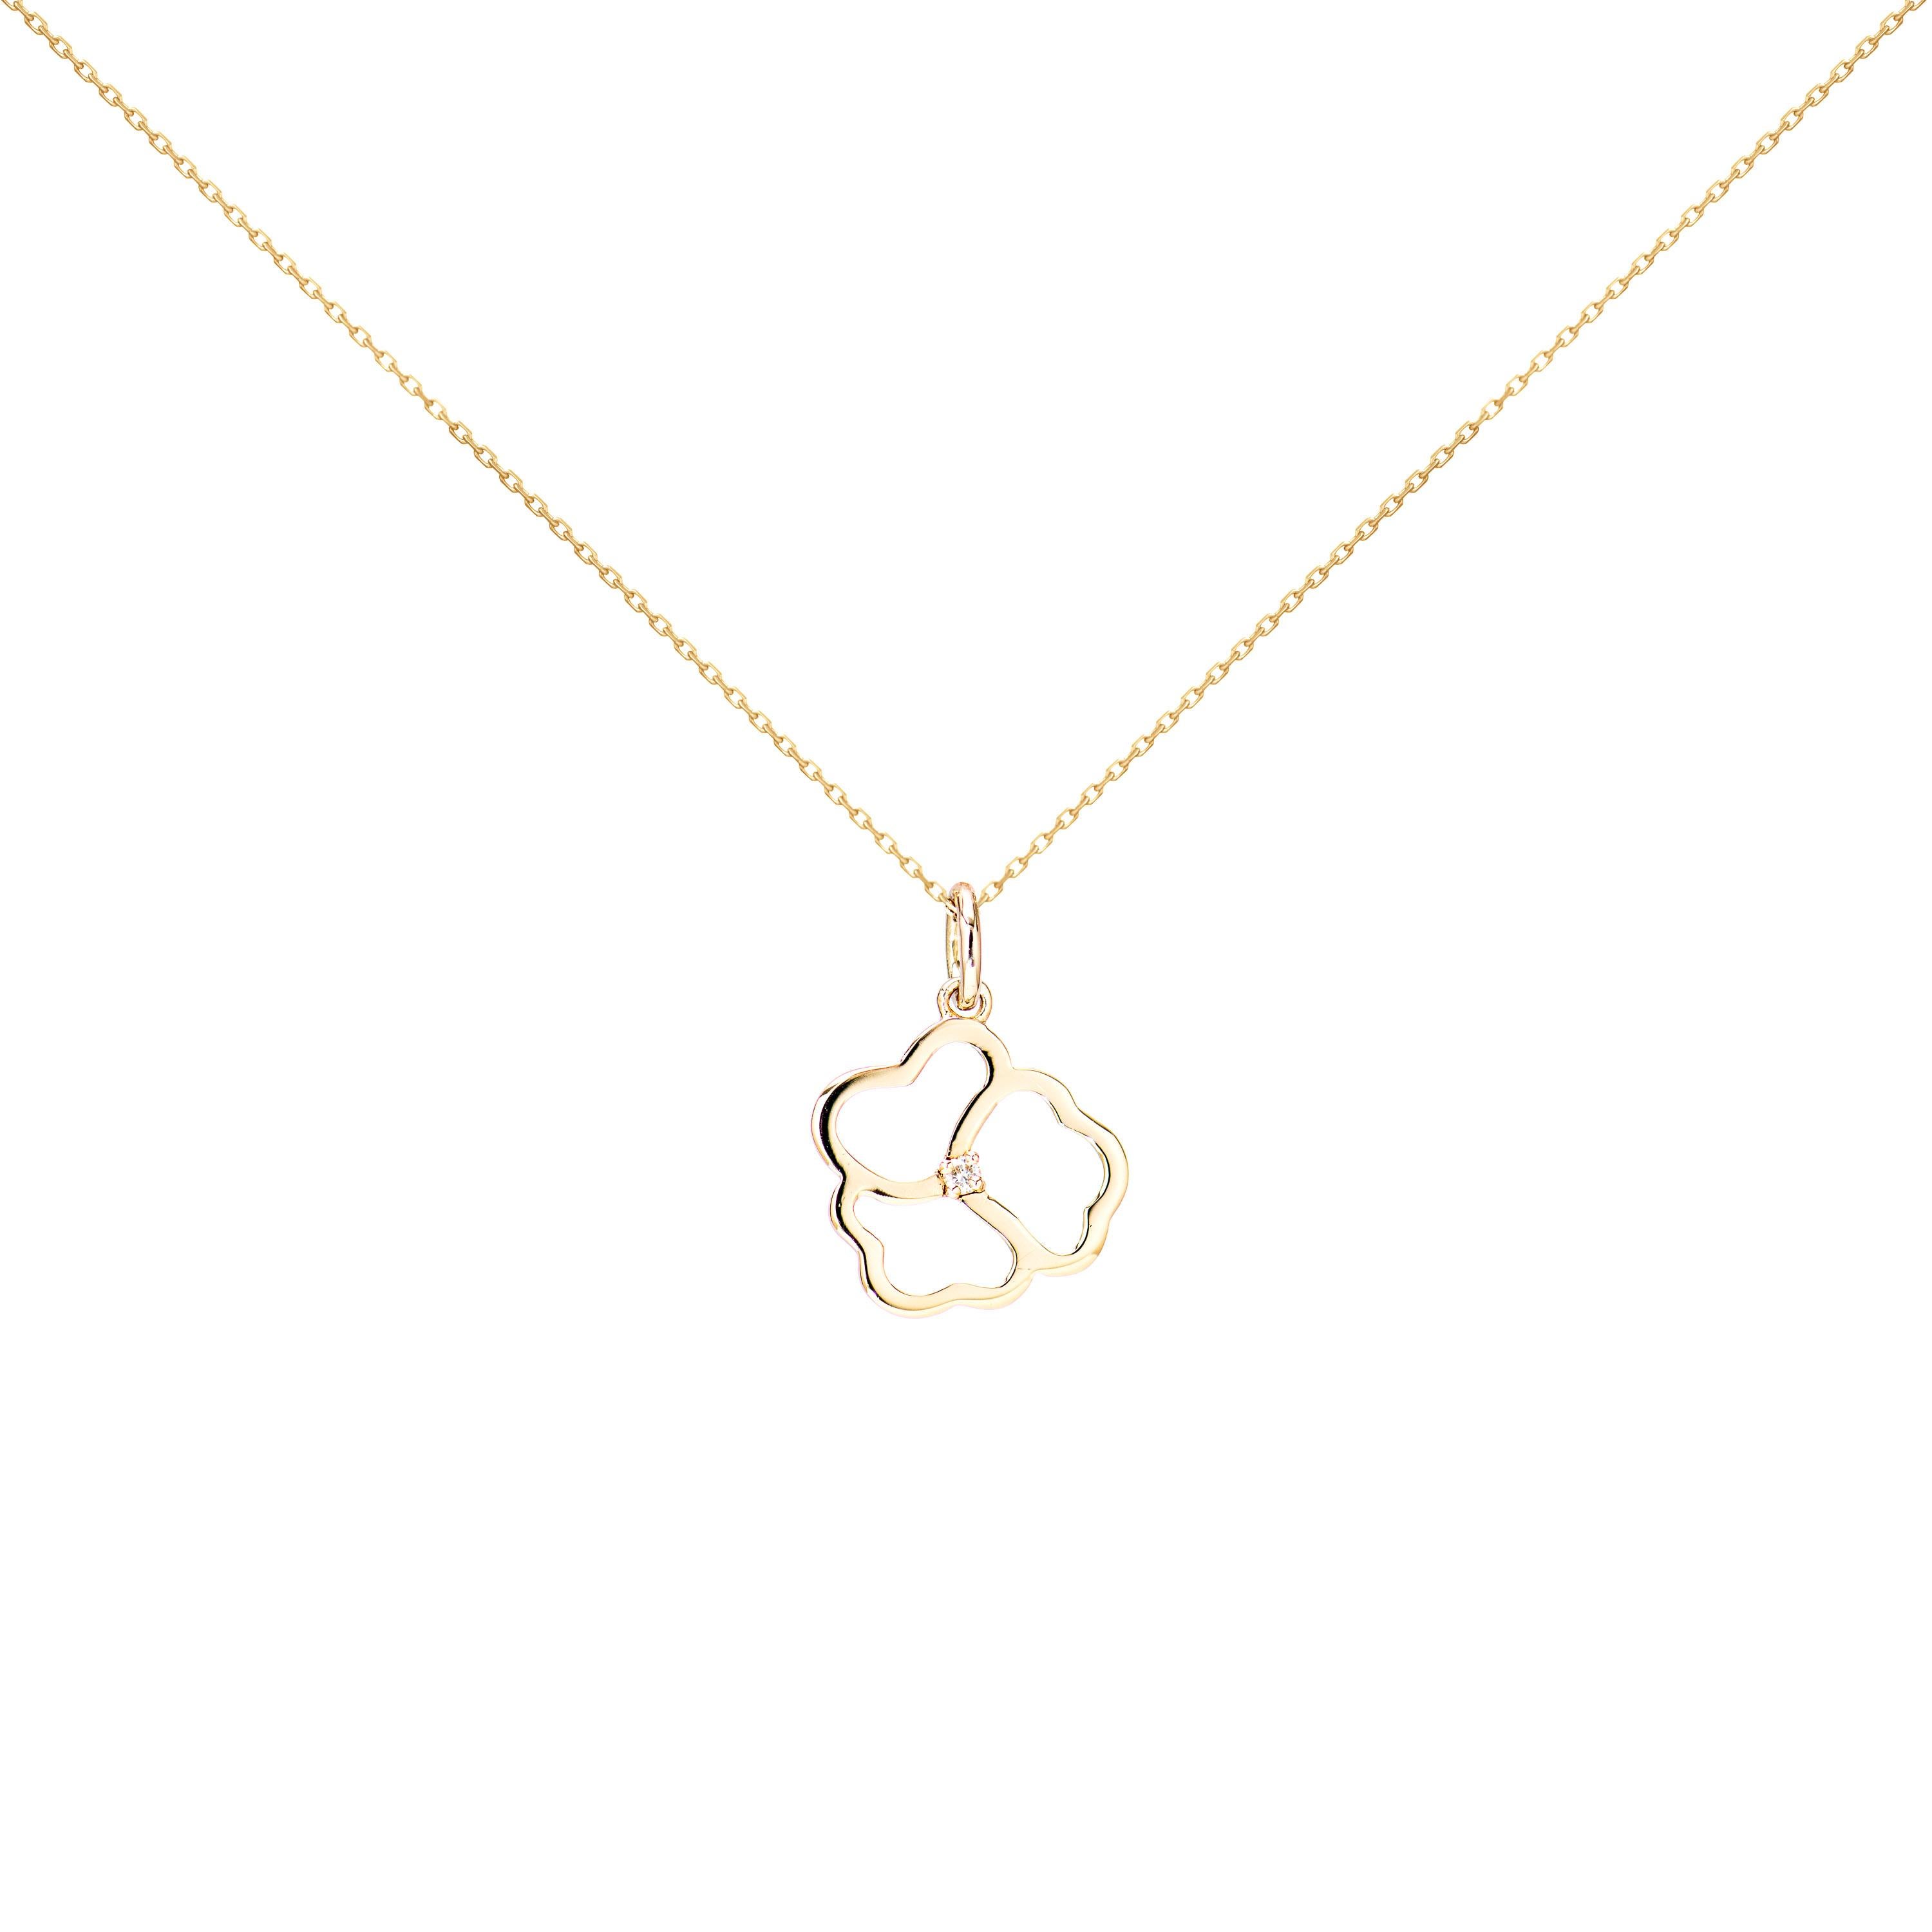 AS29
14kt yellow gold diamond Flower necklace
Let your décolletage bloom... Boasting a 14kt yellow gold construction and adorned with a diamond, this Flower necklace from AS29 is all you need to elevate your looks. Spring state of mind forever.